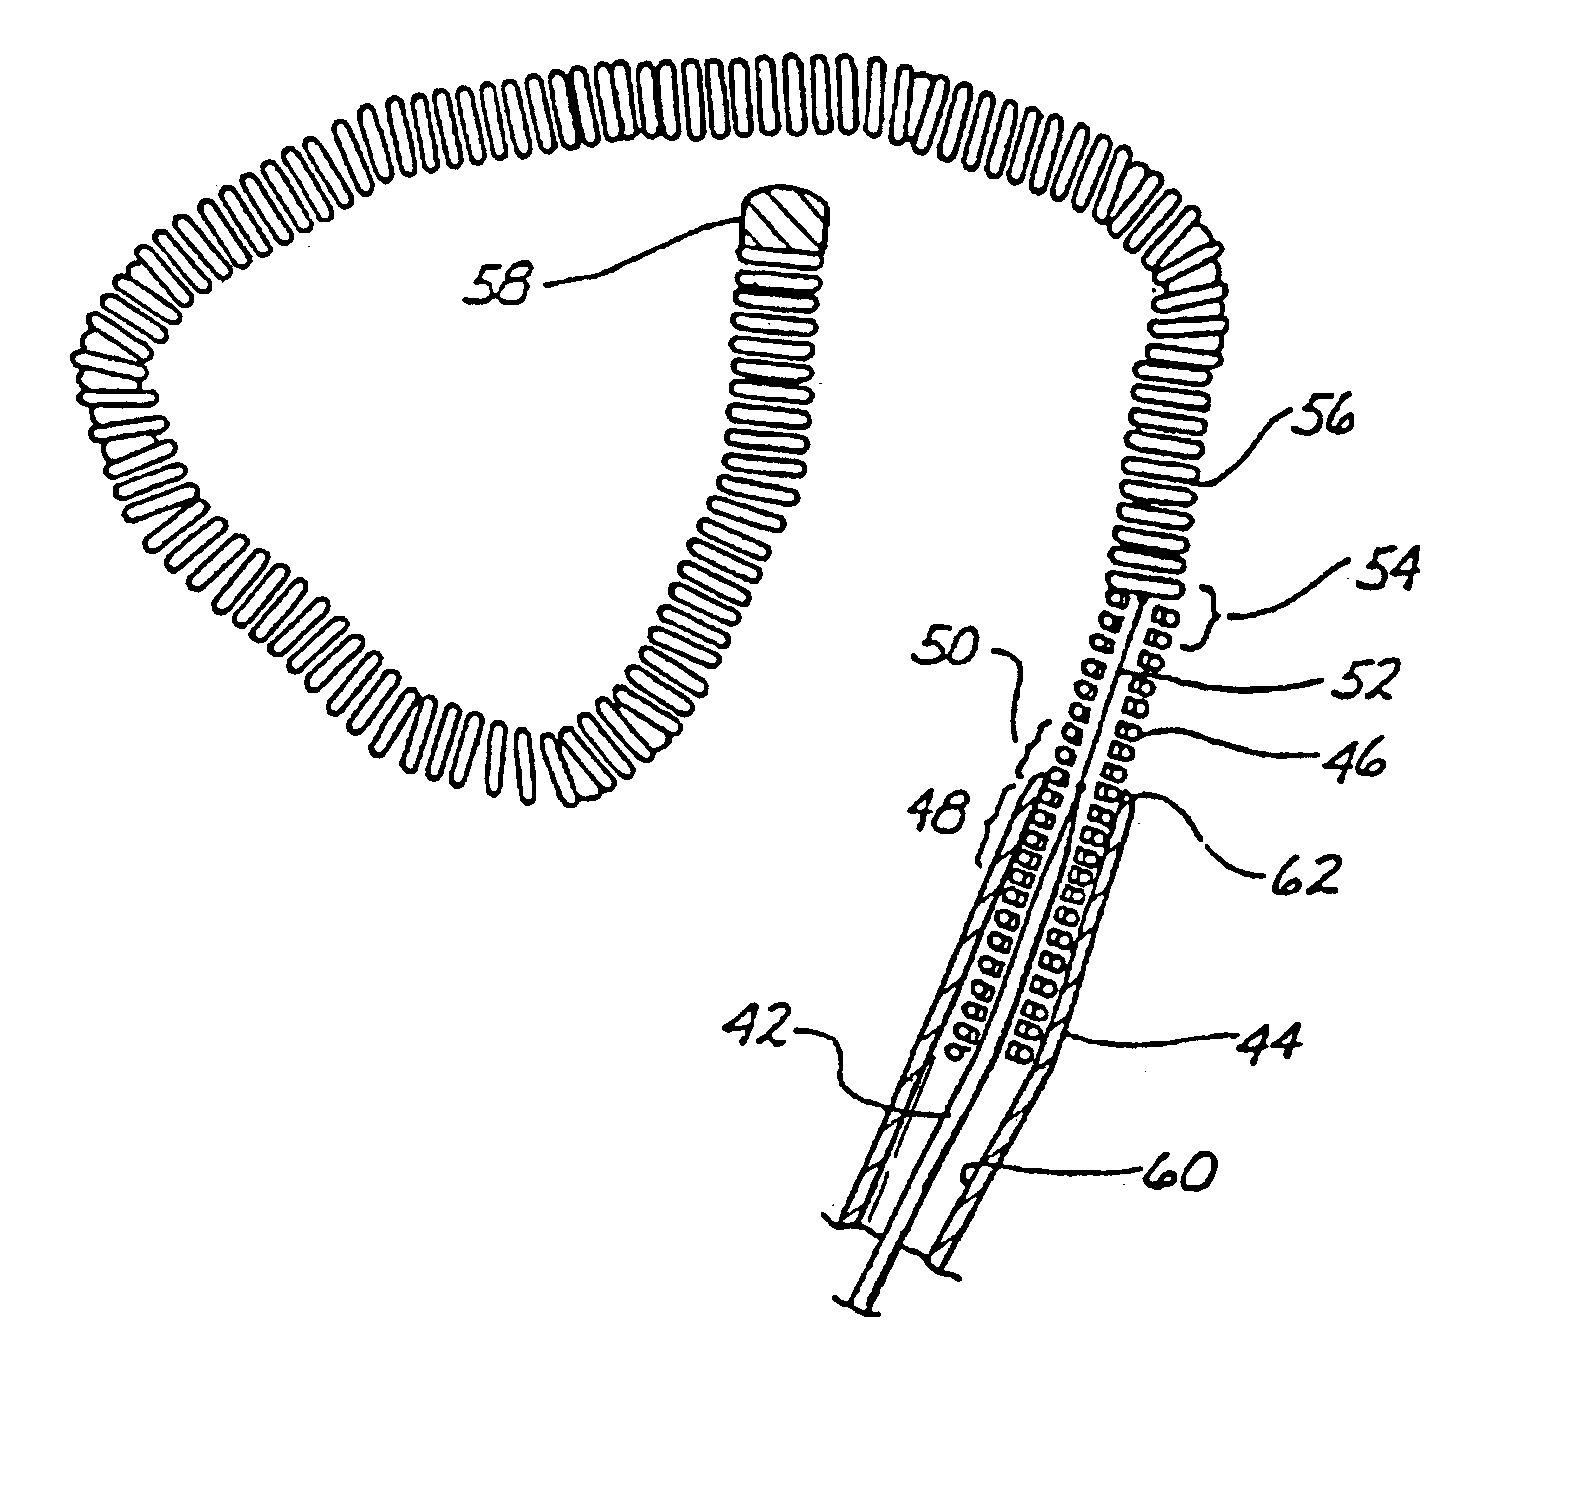 Endovascular electrolytically detachable wire and tip for the formation of thrombus in arteries, veins, aneurysms, vascular malformations and arteriovenous fistulas